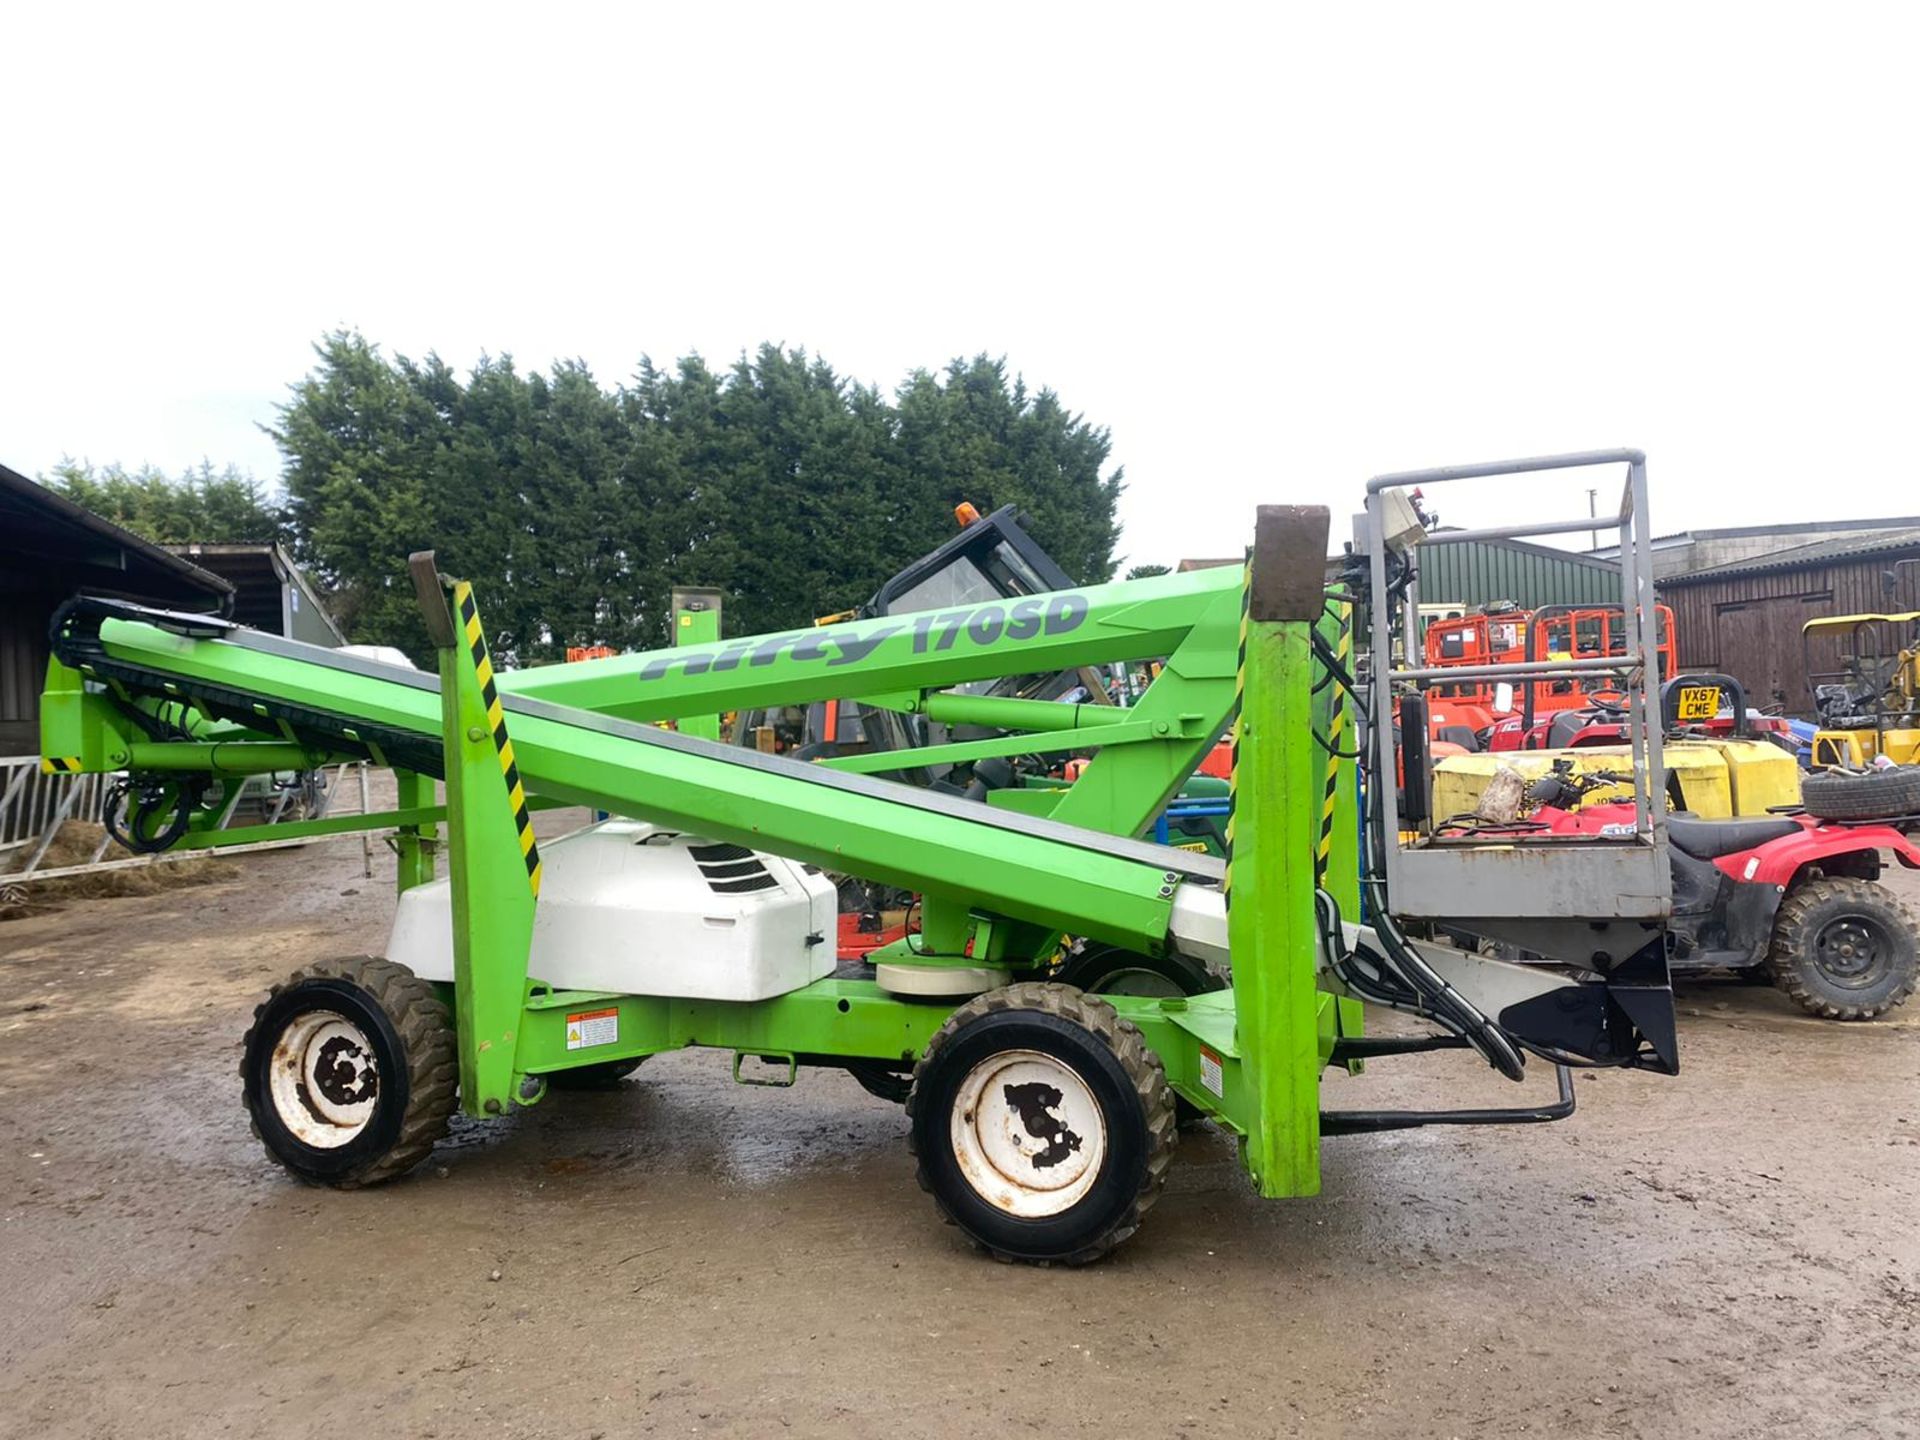 NIFTY 170SD 4 WHEEL DRIVE ROUGH TERRAIN BOOM LIFT, YEAR 2009, 17 METER REACH, IN GOOD CONDITION - Image 3 of 10